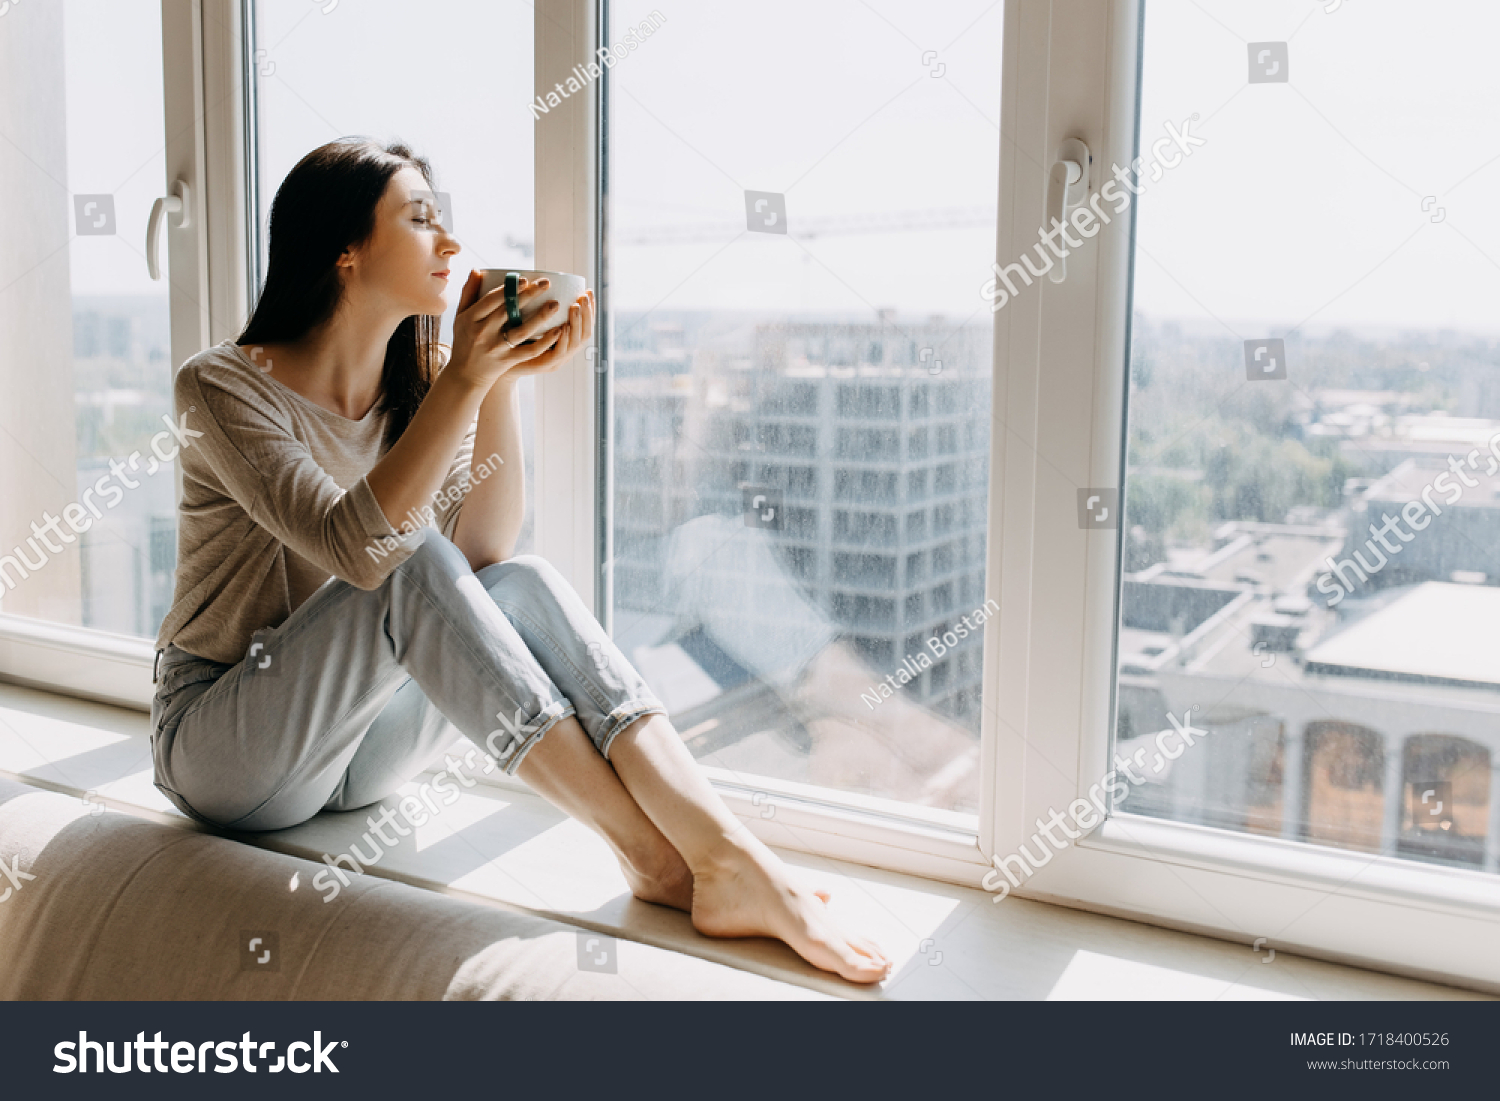 Young woman looking through the window with a city view, sitting on a windowsill, enjoying coffee or tea in the morning. #1718400526